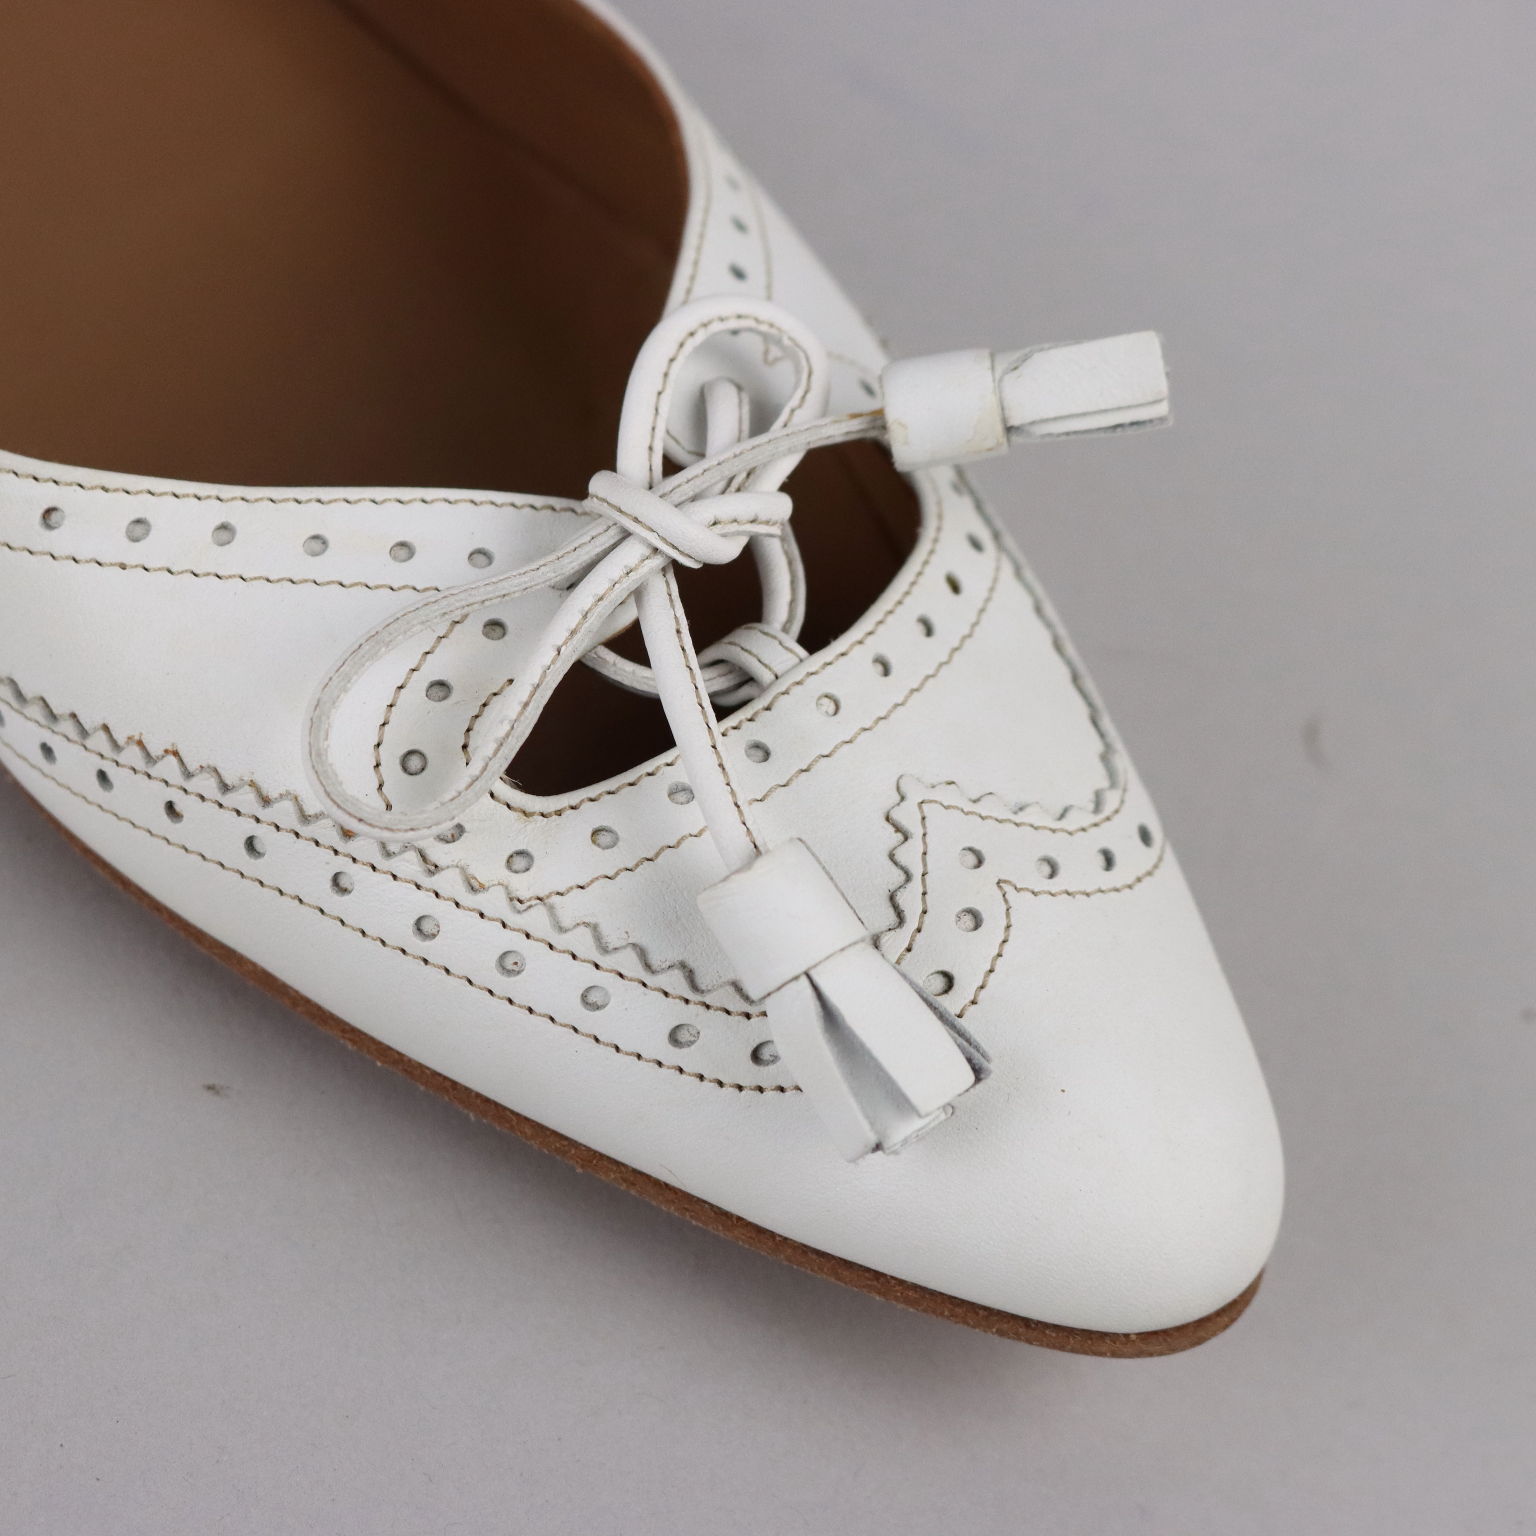 Second Hand Hermès Ballerina Shoes White Leather US Size 9 France